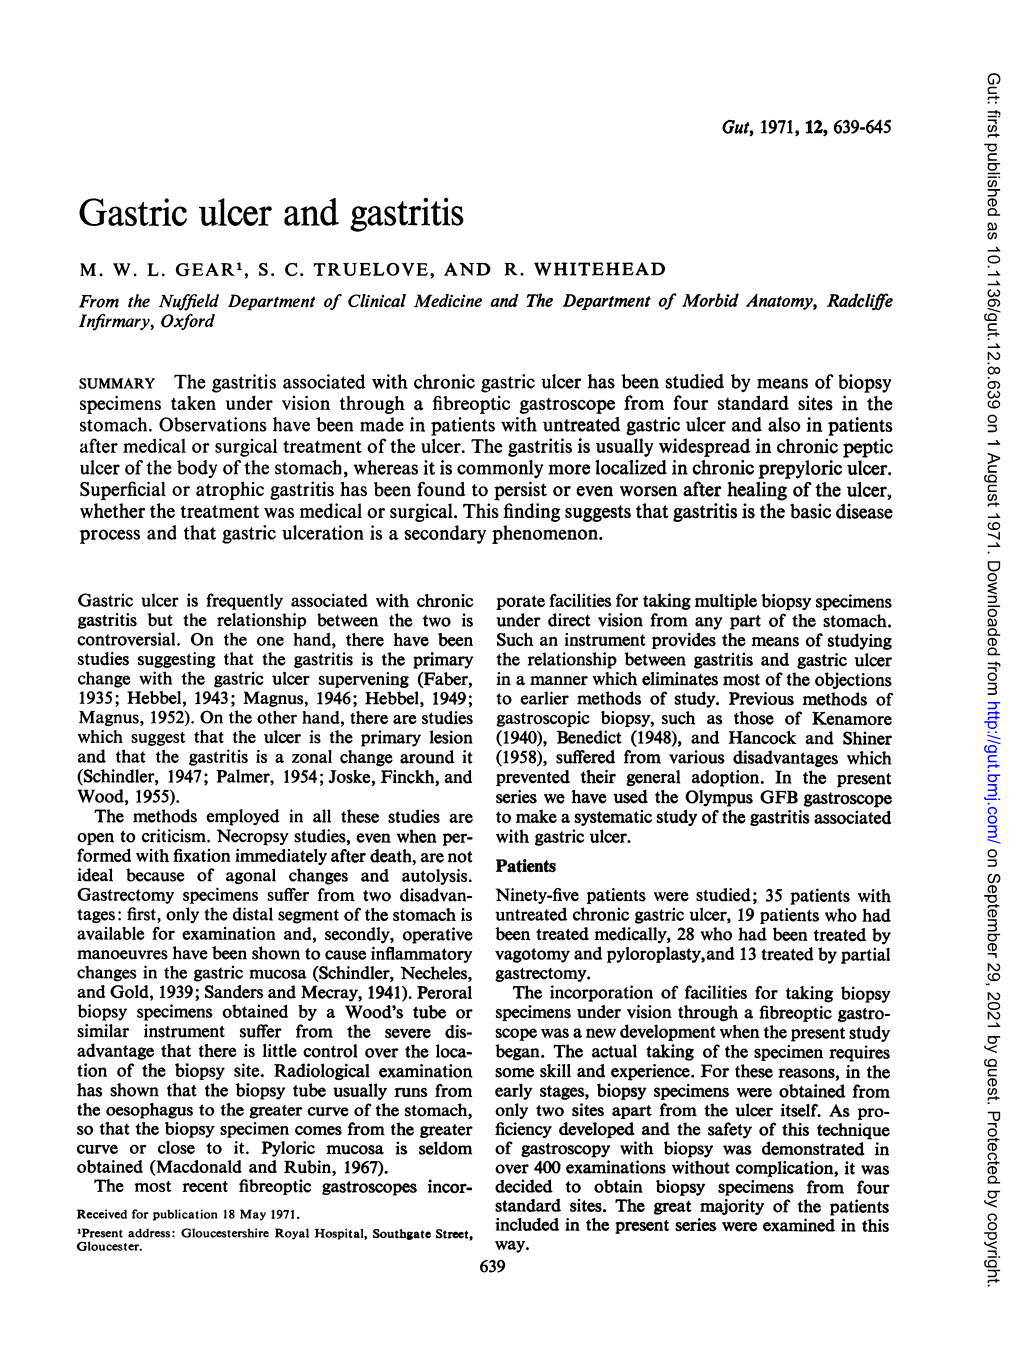 Gastric Ulcer and Gastritis